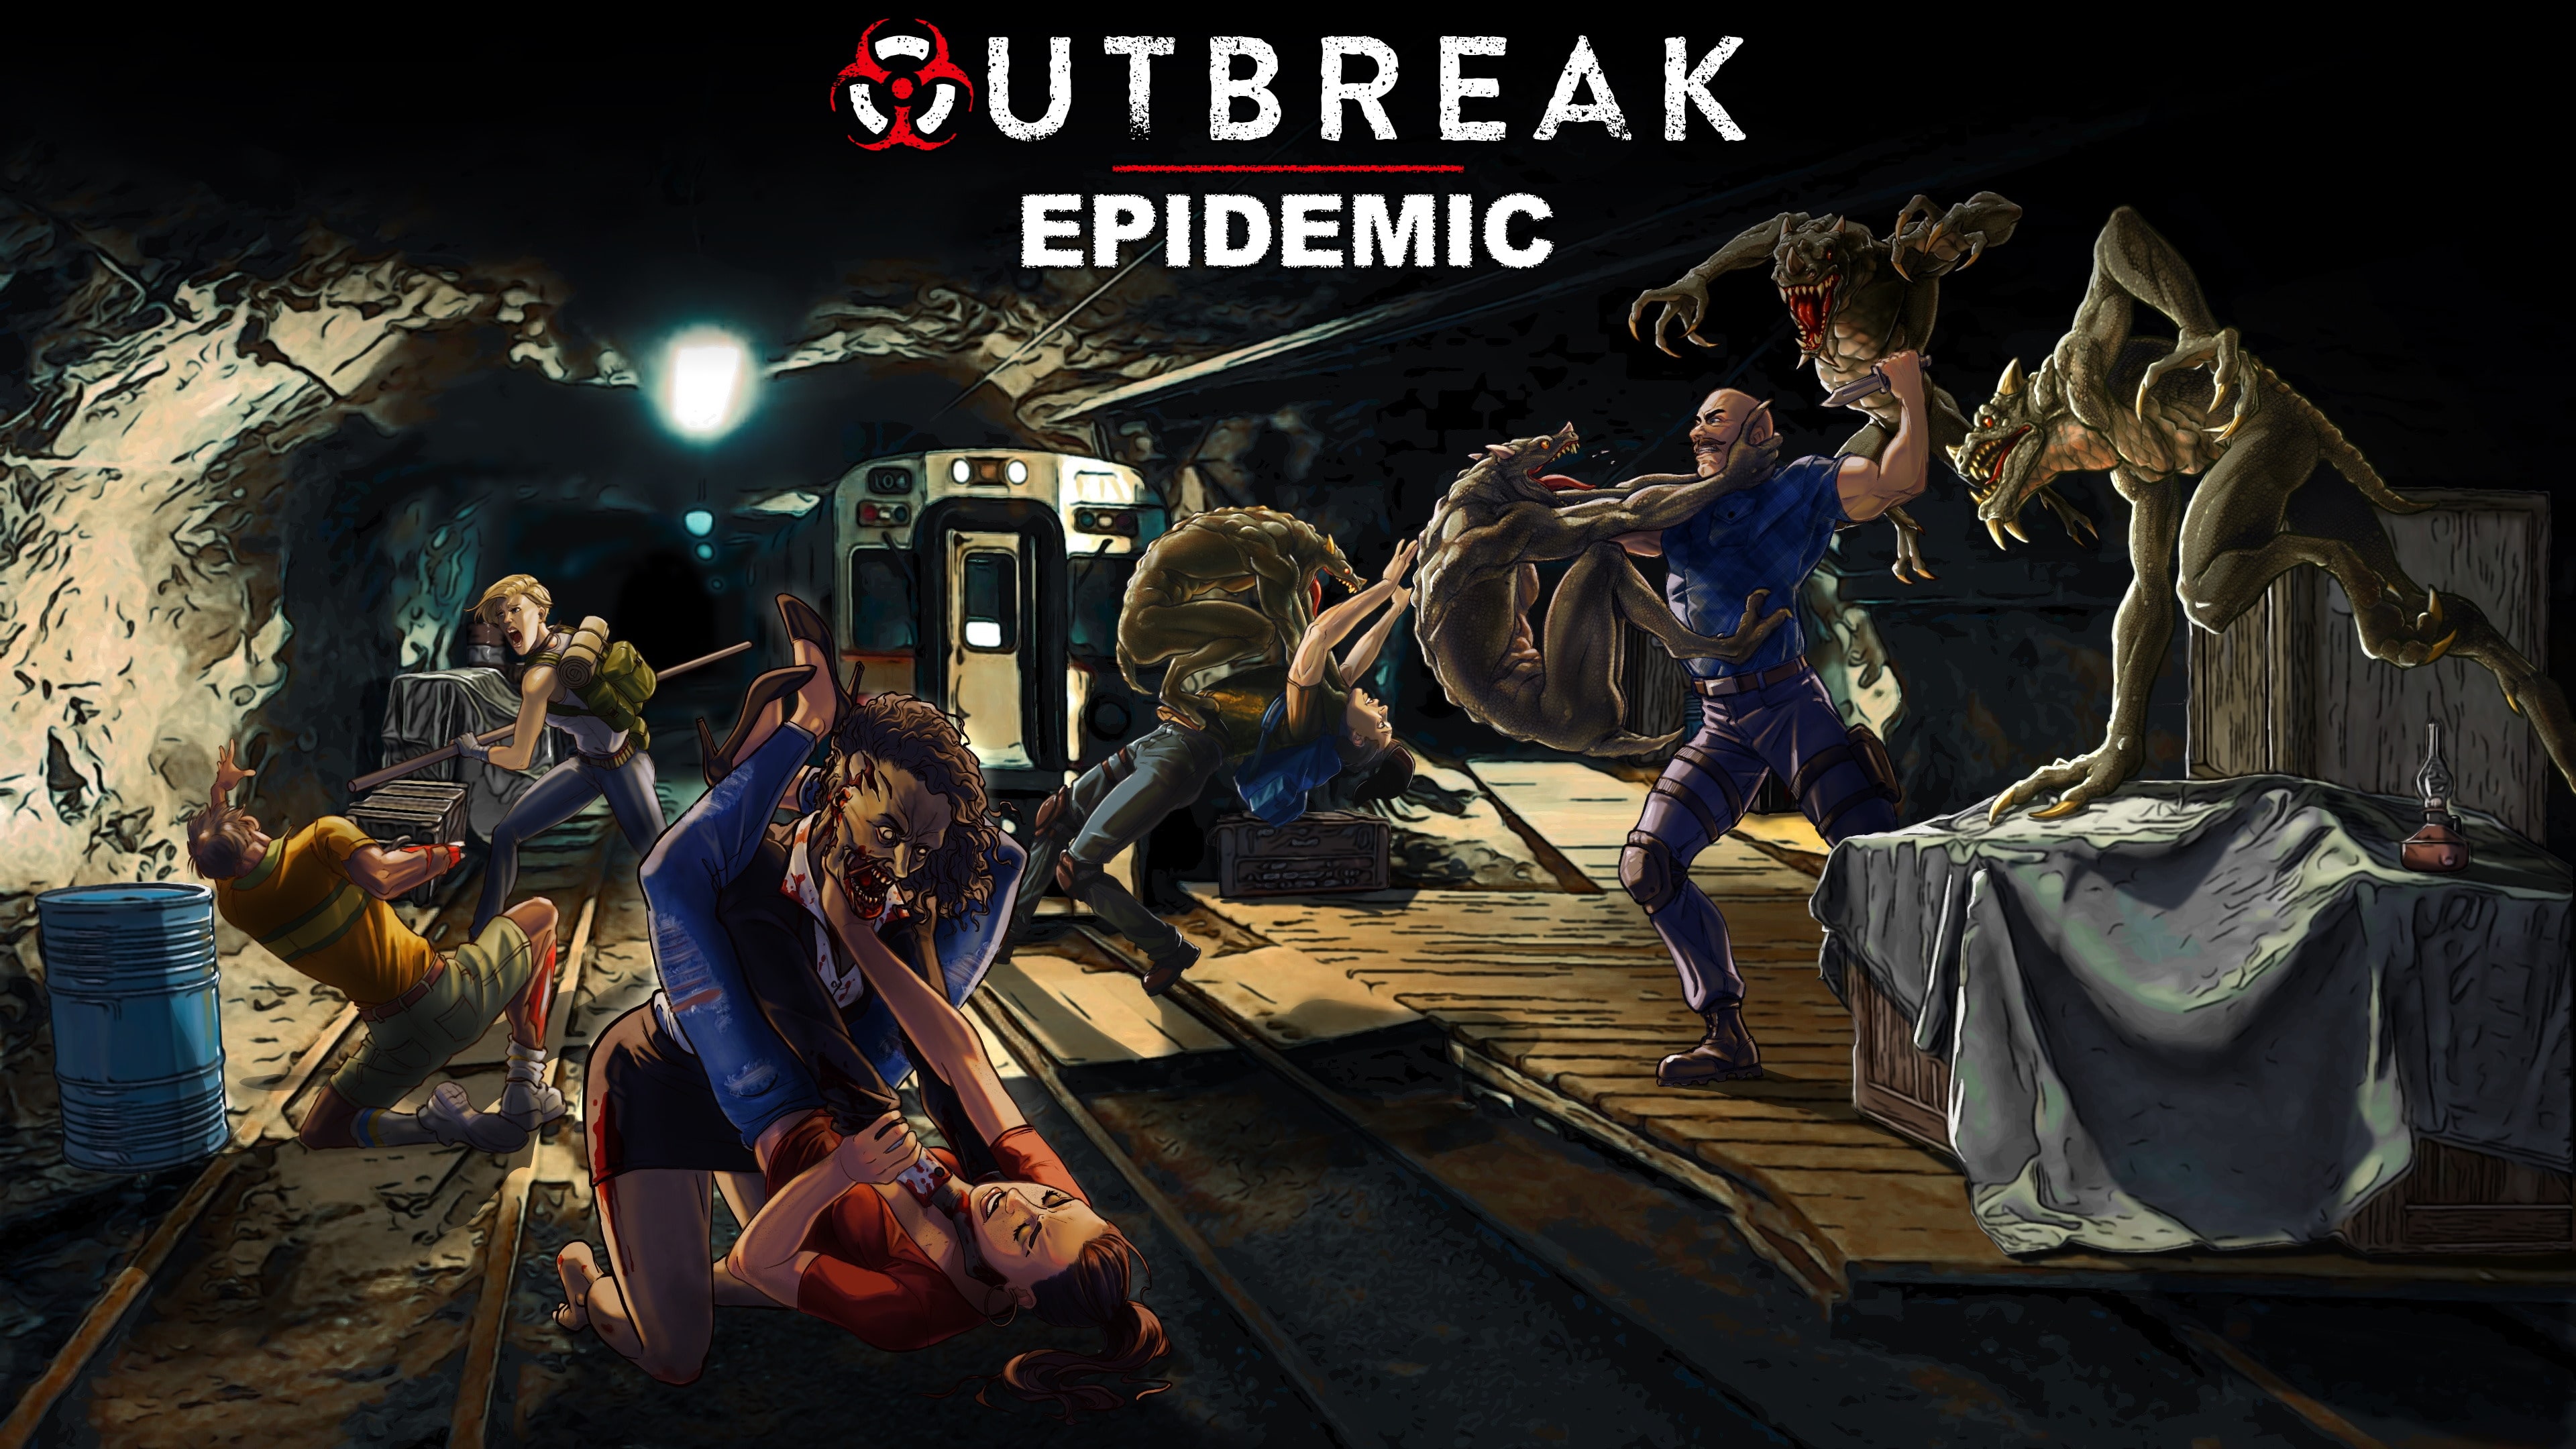 Outbreak: Epidemic Definitive Collection